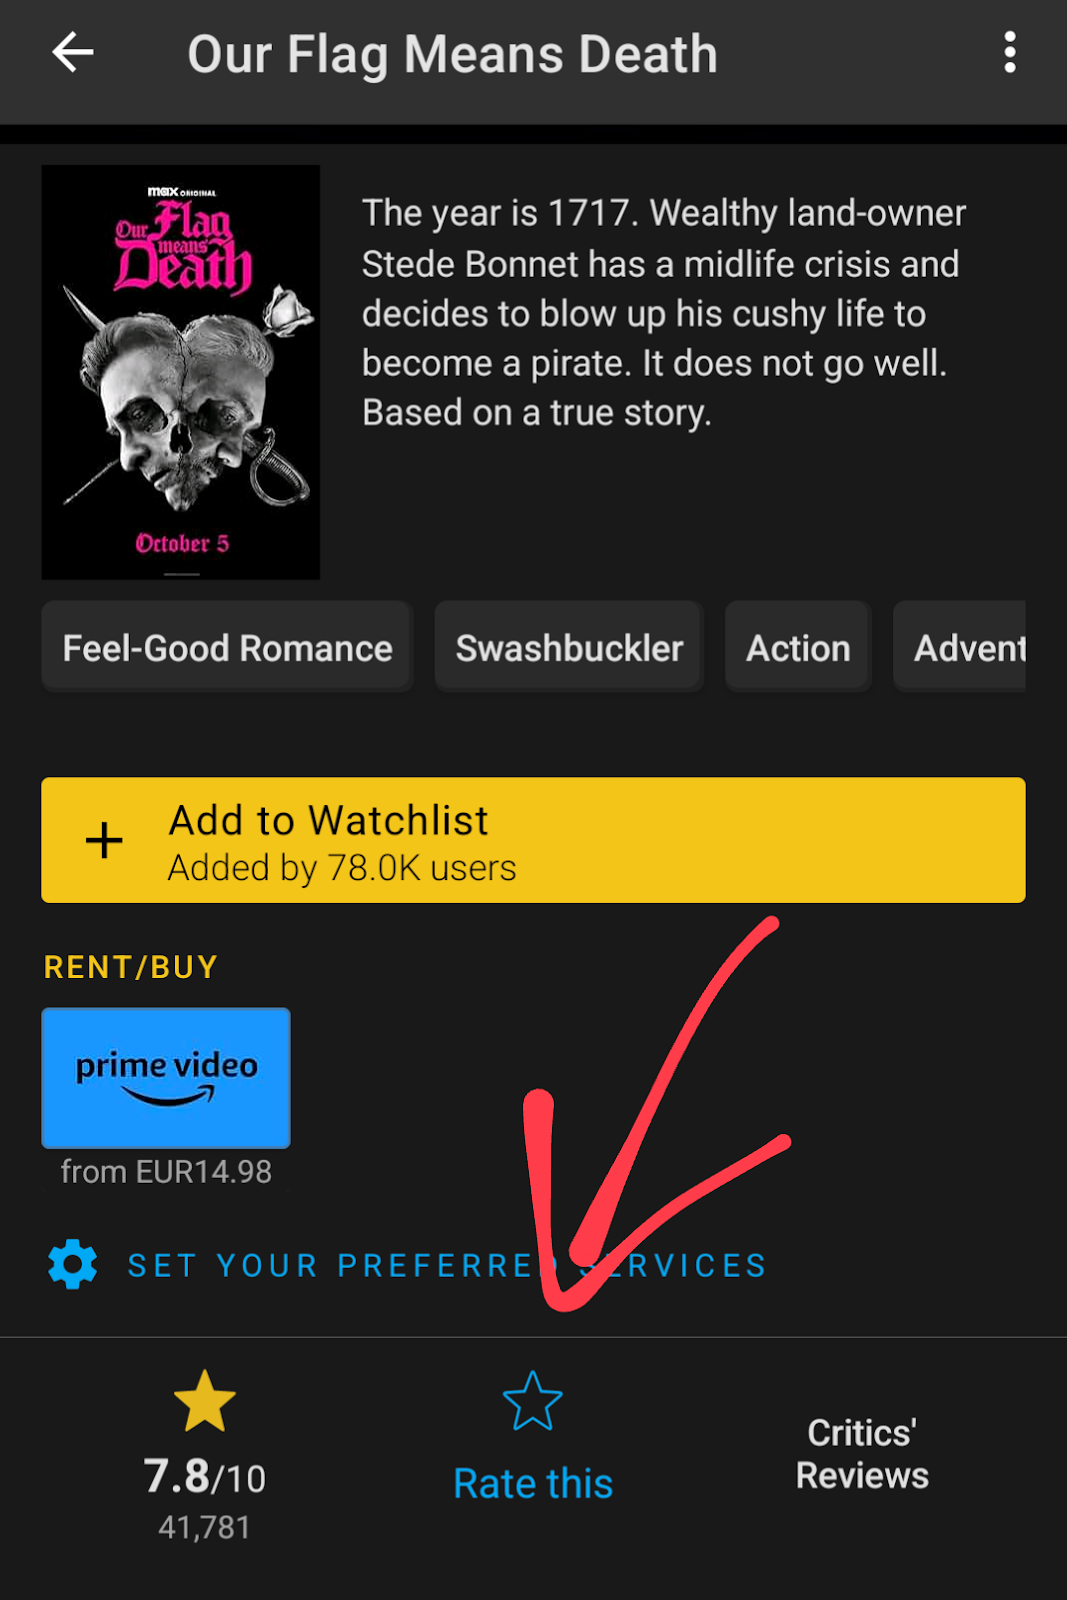 Screenshot showing where to rate the show on the website